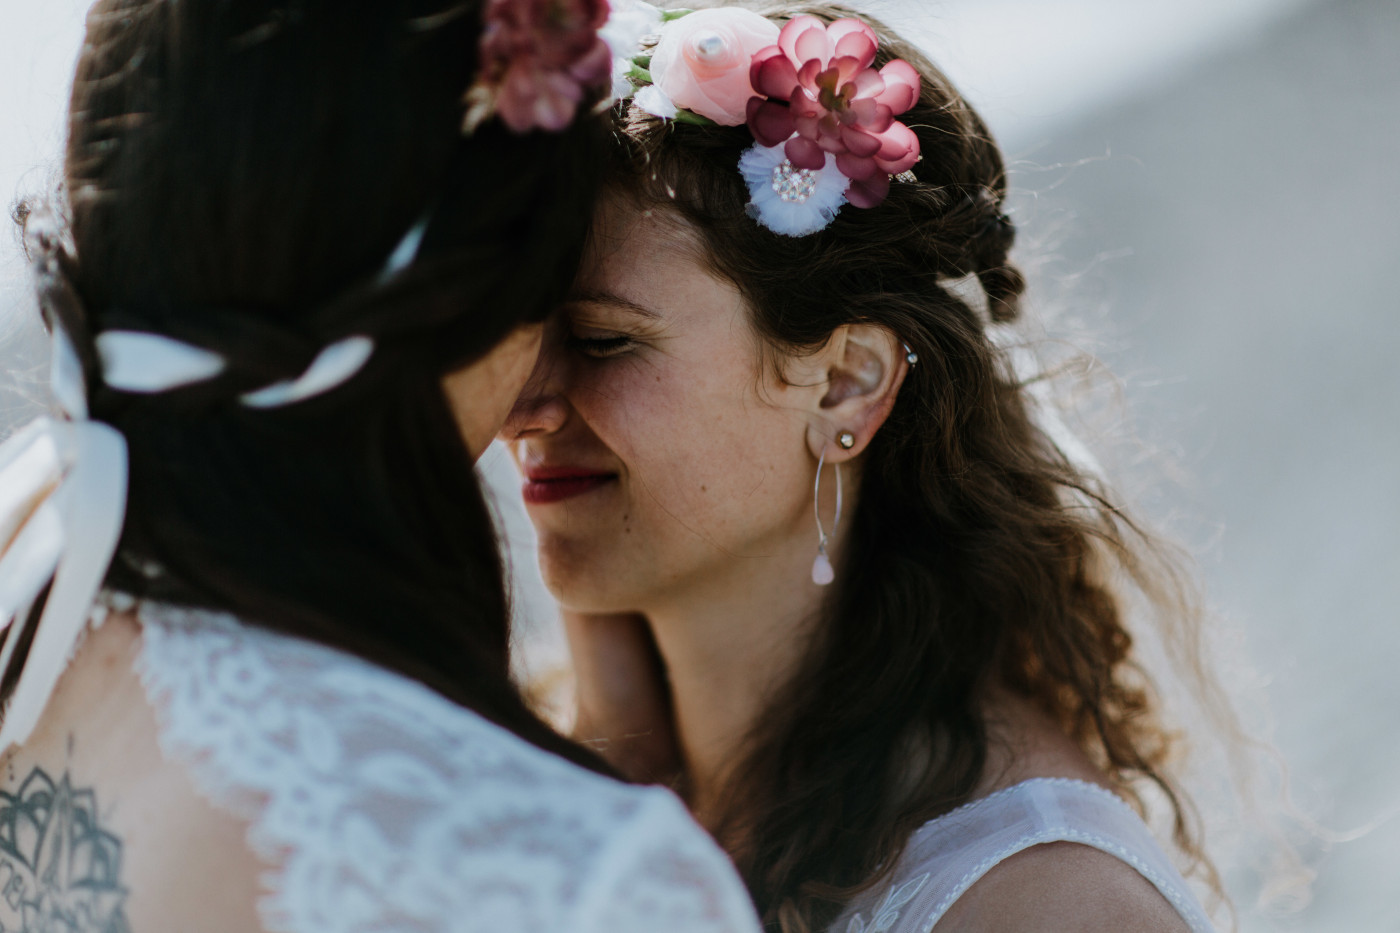 Margaux and Heather hold each other close during their first dance on Mount Hood. Elopement photography at Mount Hood by Sienna Plus Josh.